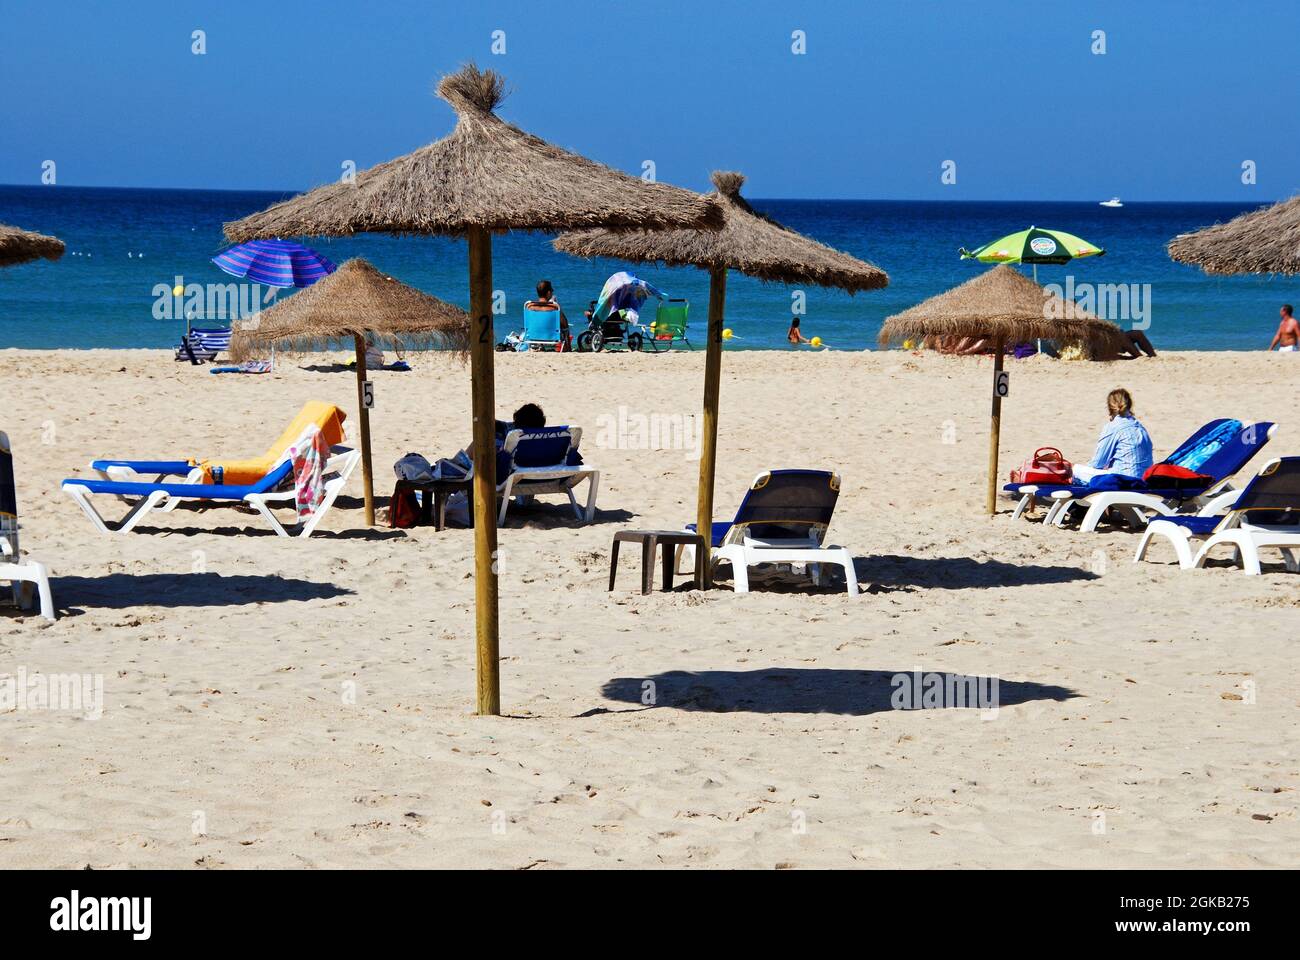 Tourists relaxing on the beach with views out to sea, Zahara de los Atunes, Cadiz Province, Andalusia, Spain. Stock Photo